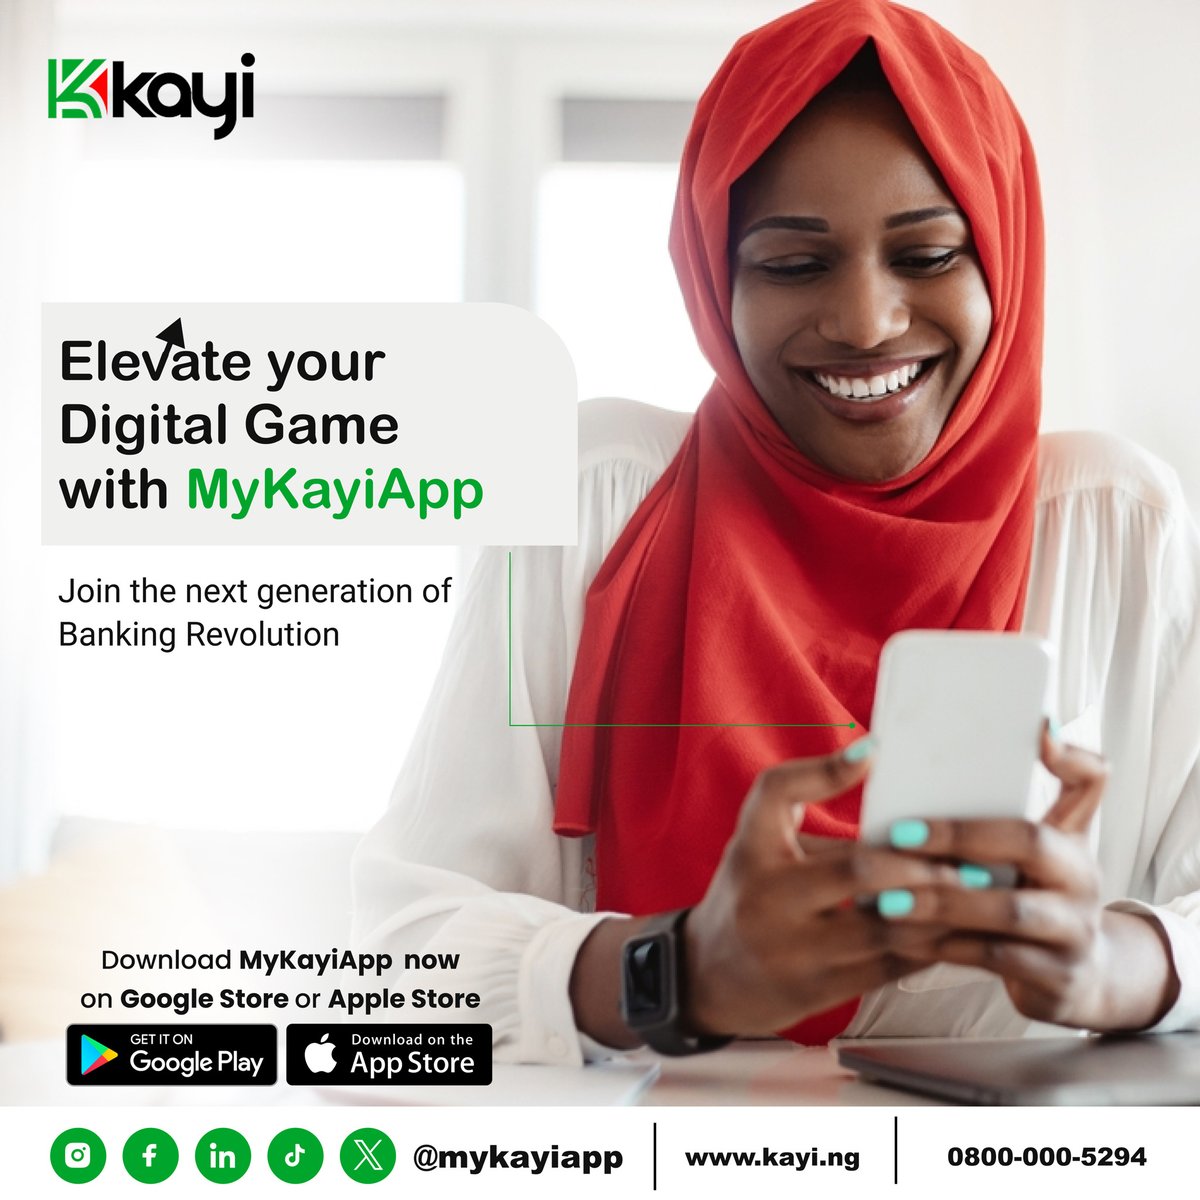 Elevate your digital game with MyKayiApp! Connect, transact, and experience the future of finance. Download MyKayiApp now on Google Store or Apple Store and join the next-gen banking revolution.
#MyKayiApp #NowLive #Kayiway #DownloadNow #Bankingwithoutlimits #downloadmykayiapp